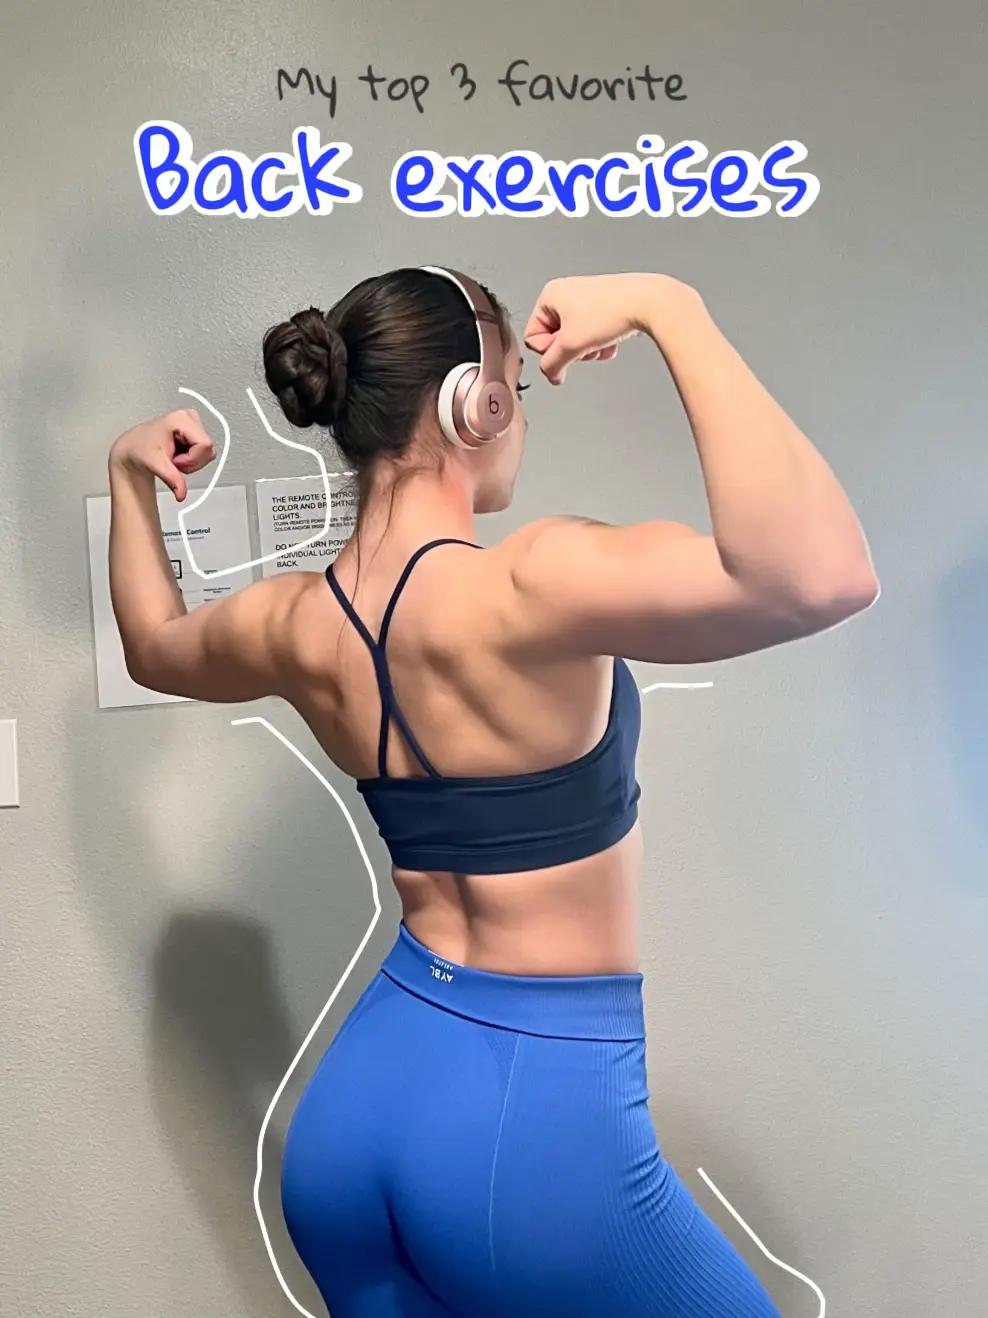 My top 3 favorite back exercises🦋